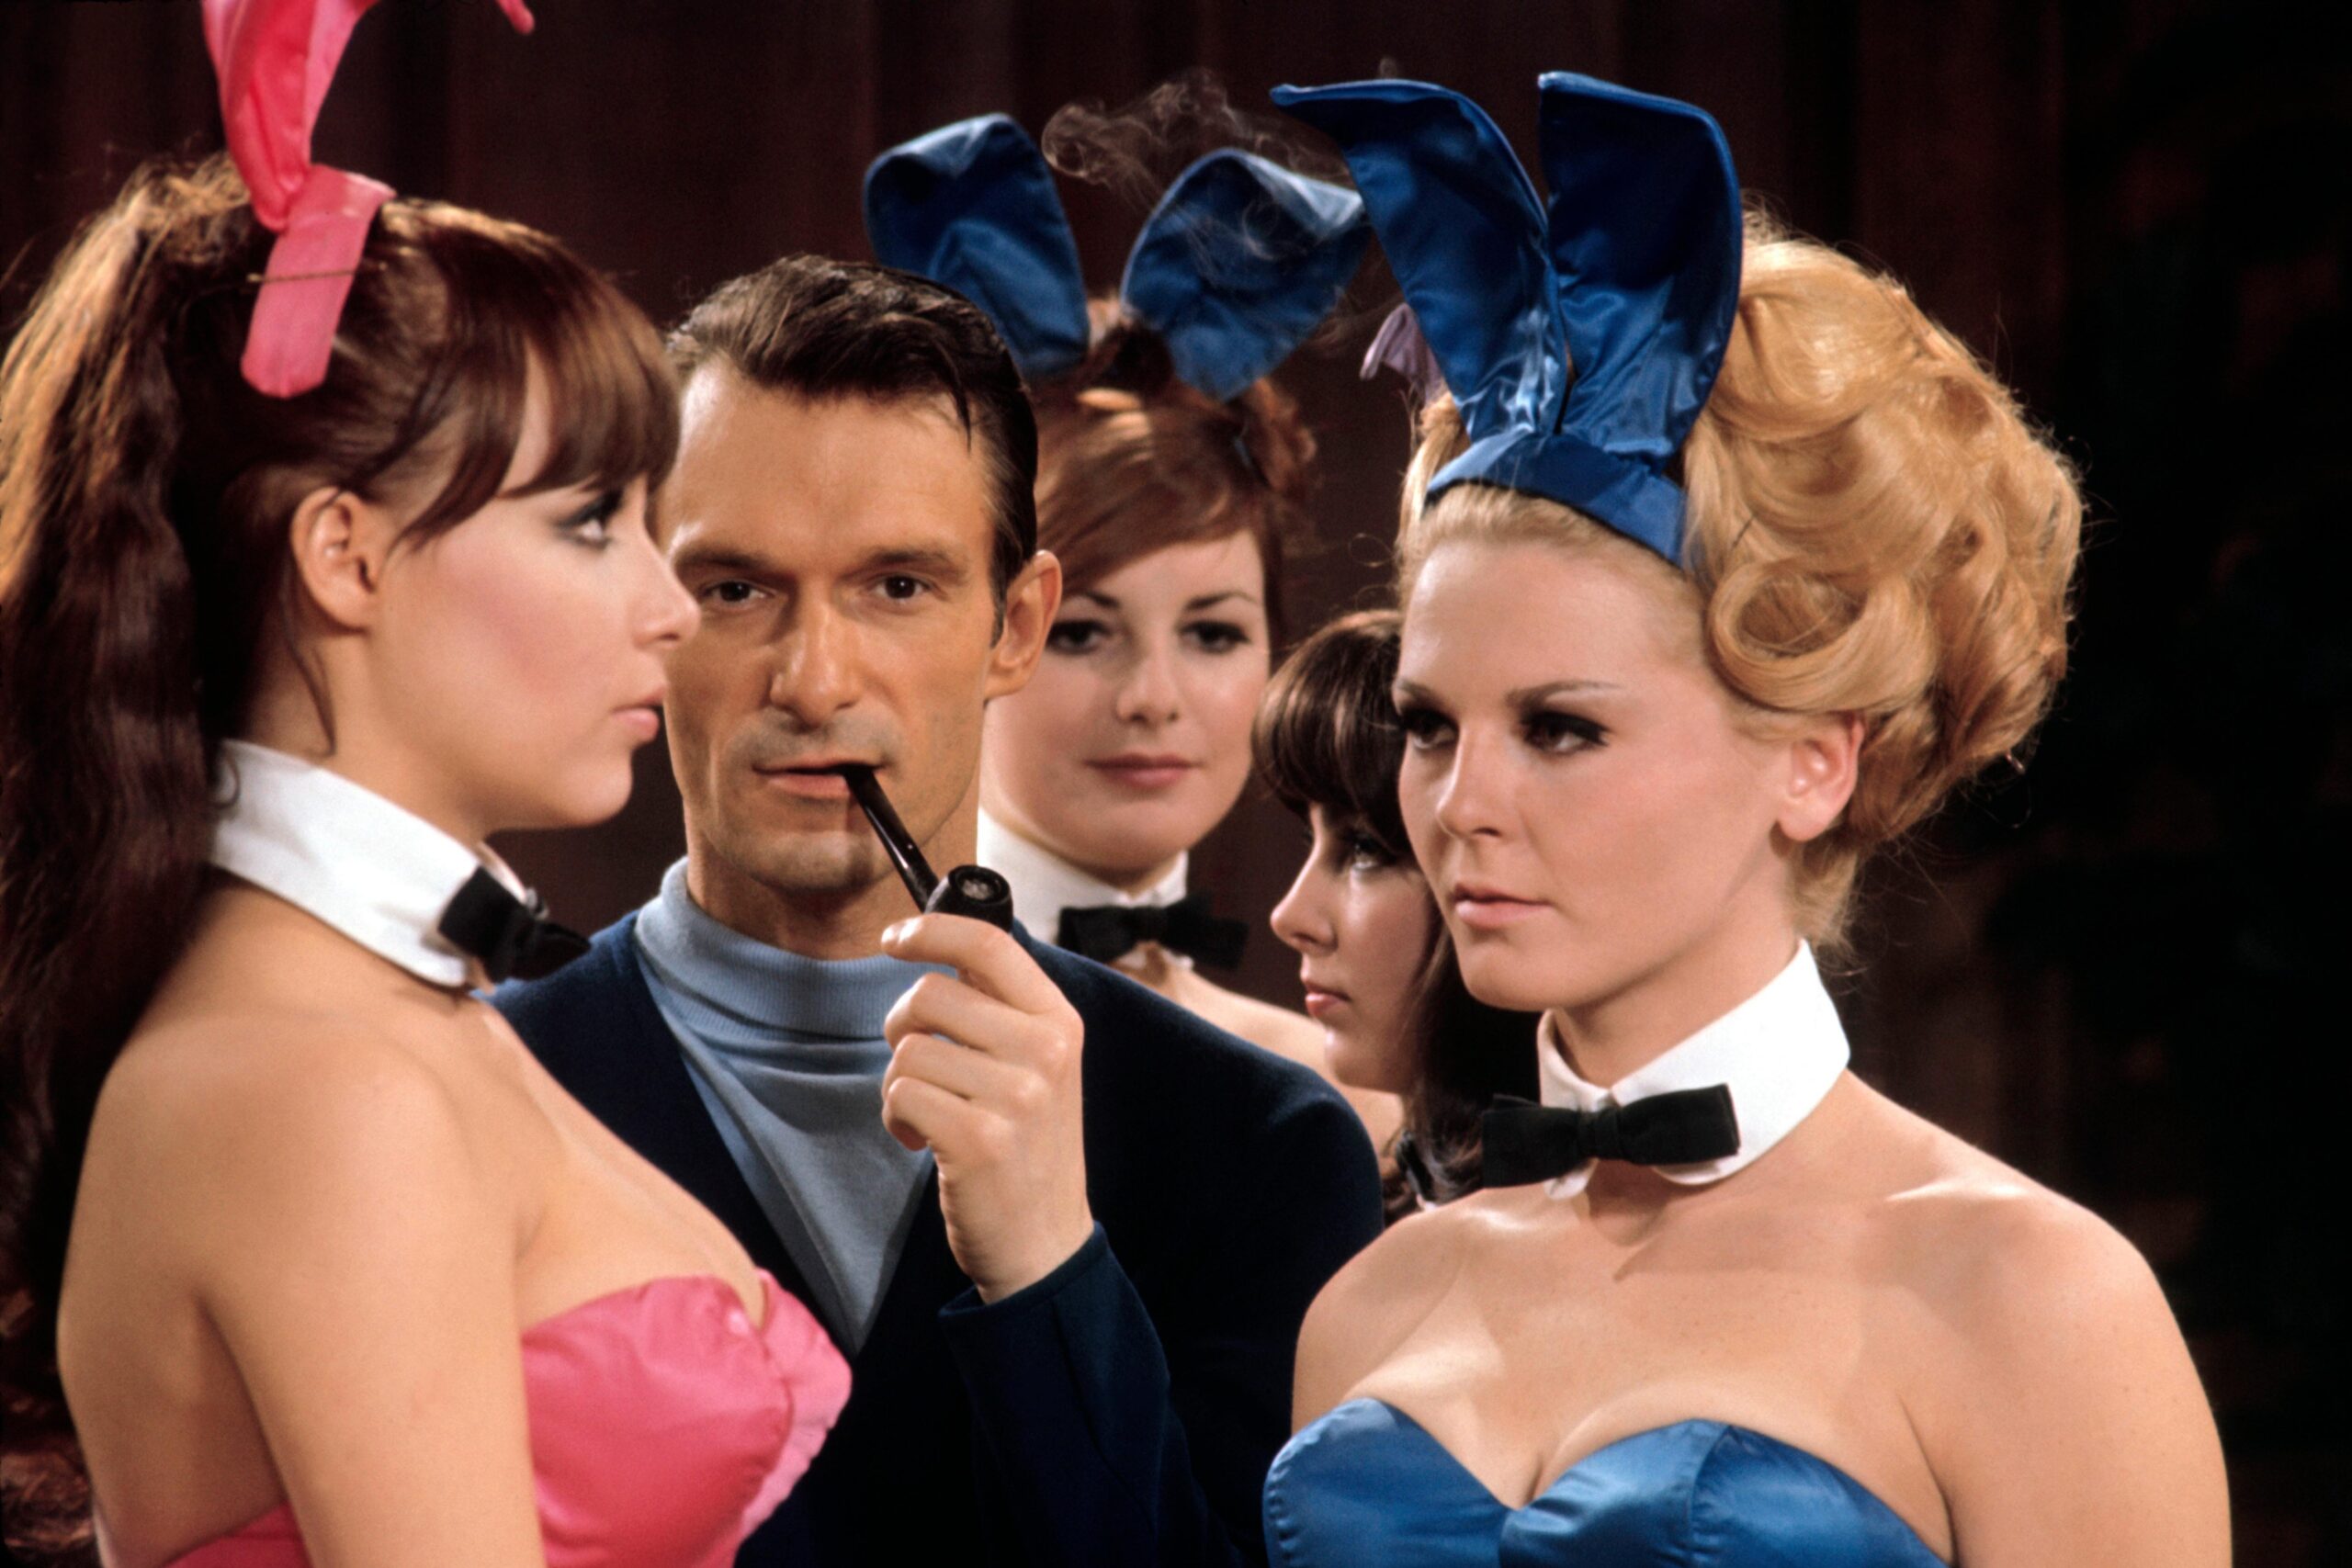 The Hugh Hefner First Wife Millie Williams? Where Is She Now?